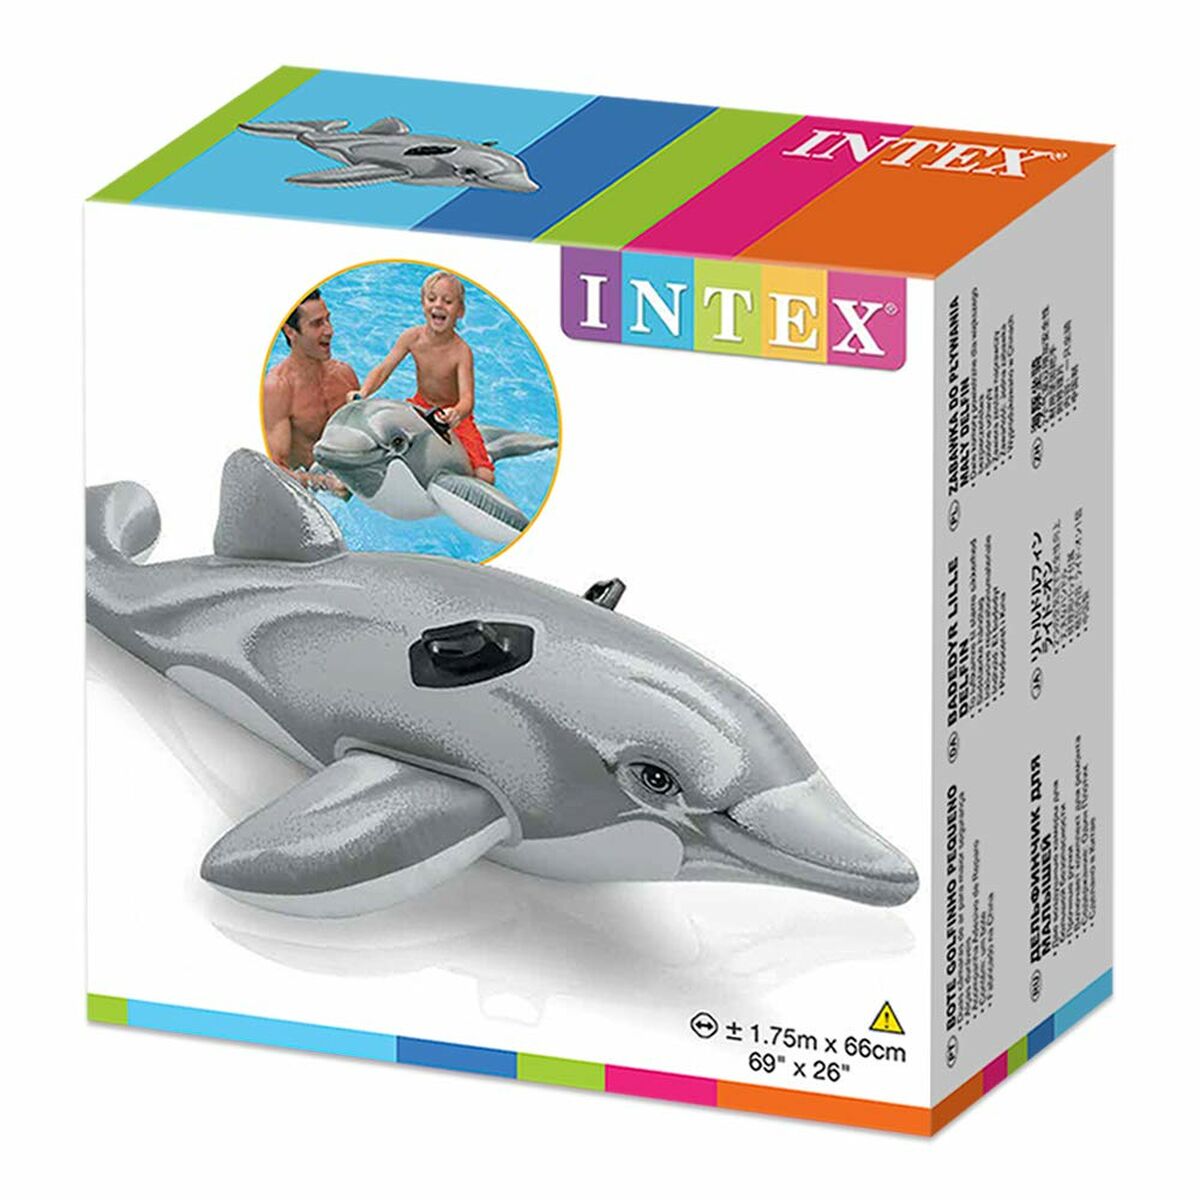 Inflatable pool figure Intex Lil' Dolphin Ride-On